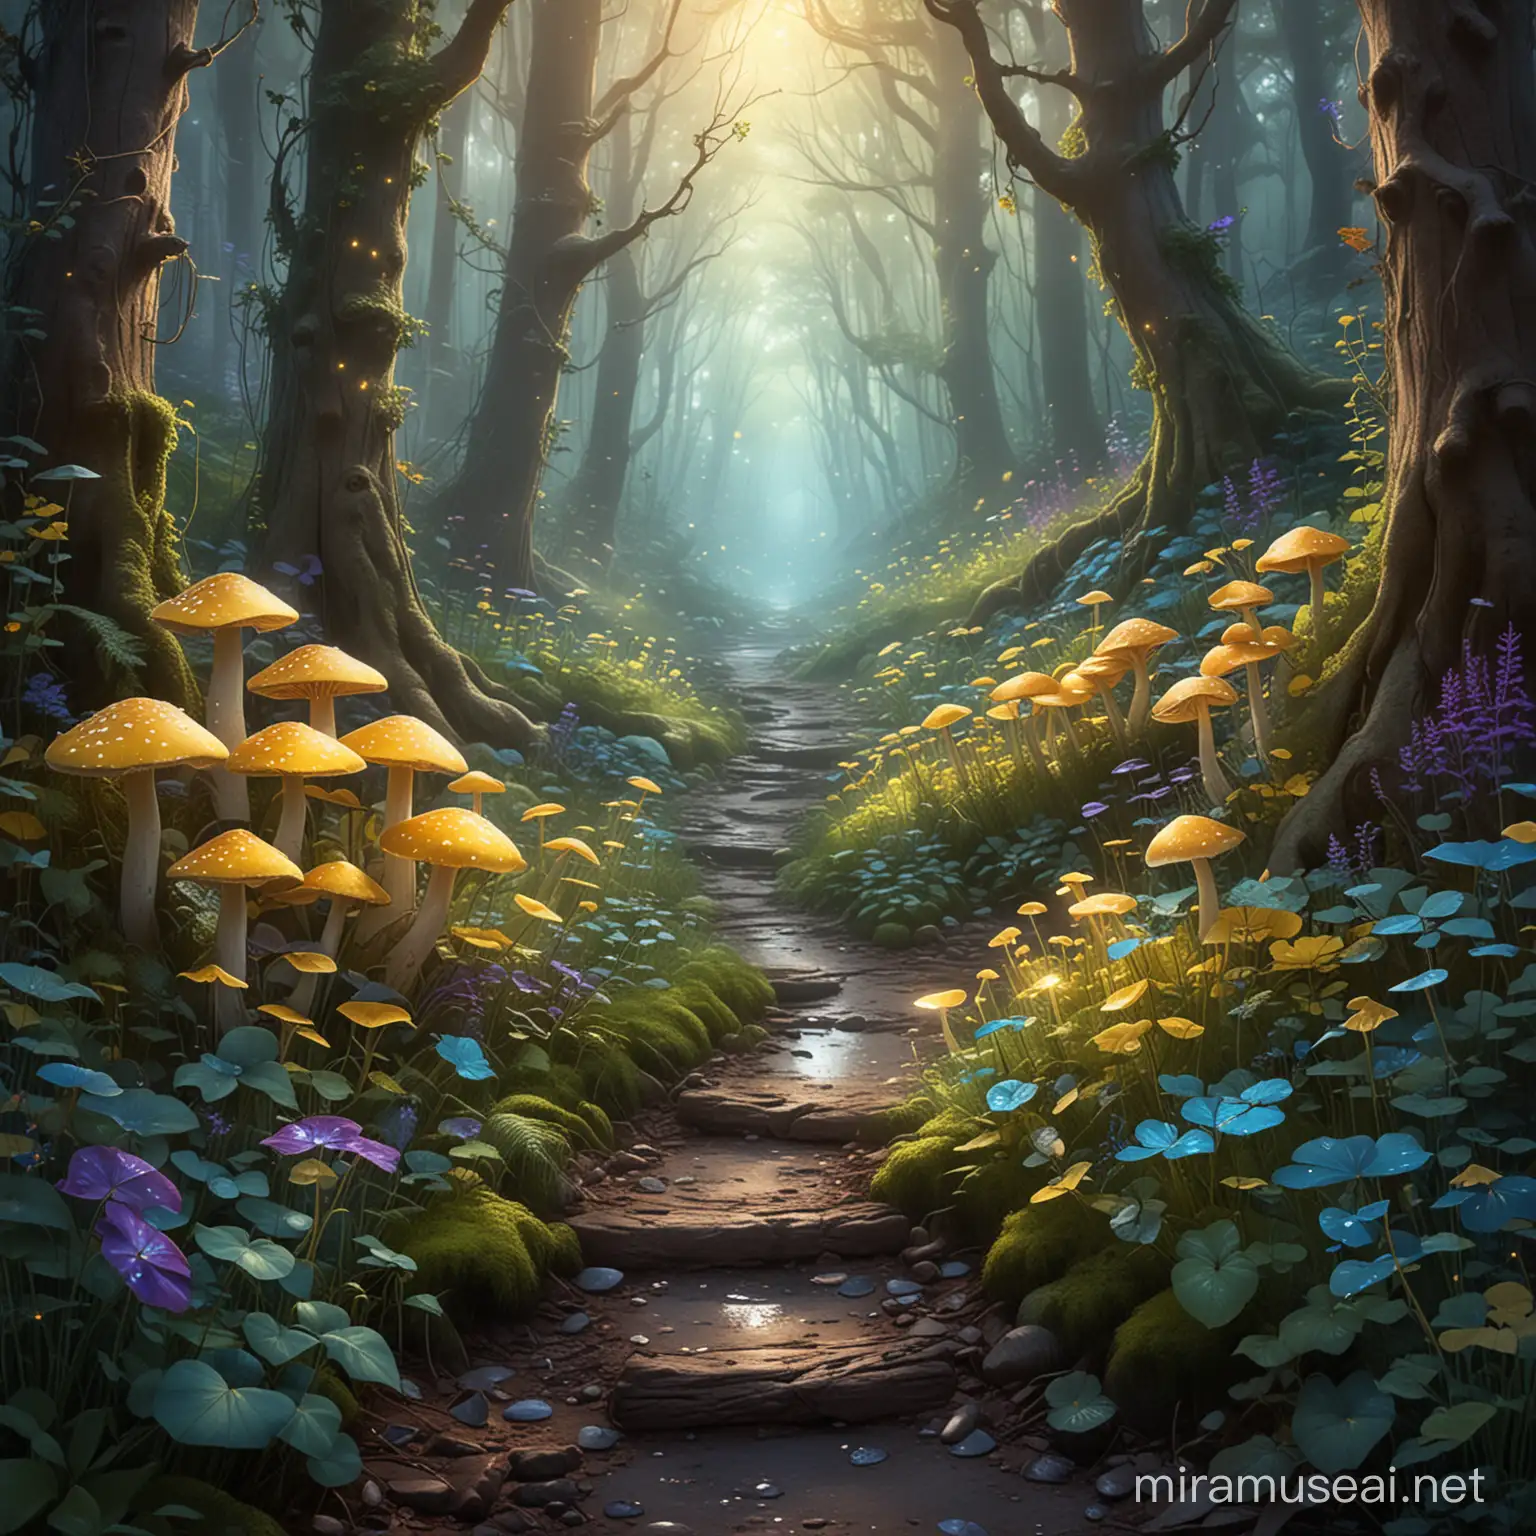 Hidden Path Through Ancient Forest with Glowing Mushrooms and Colorful Fairies